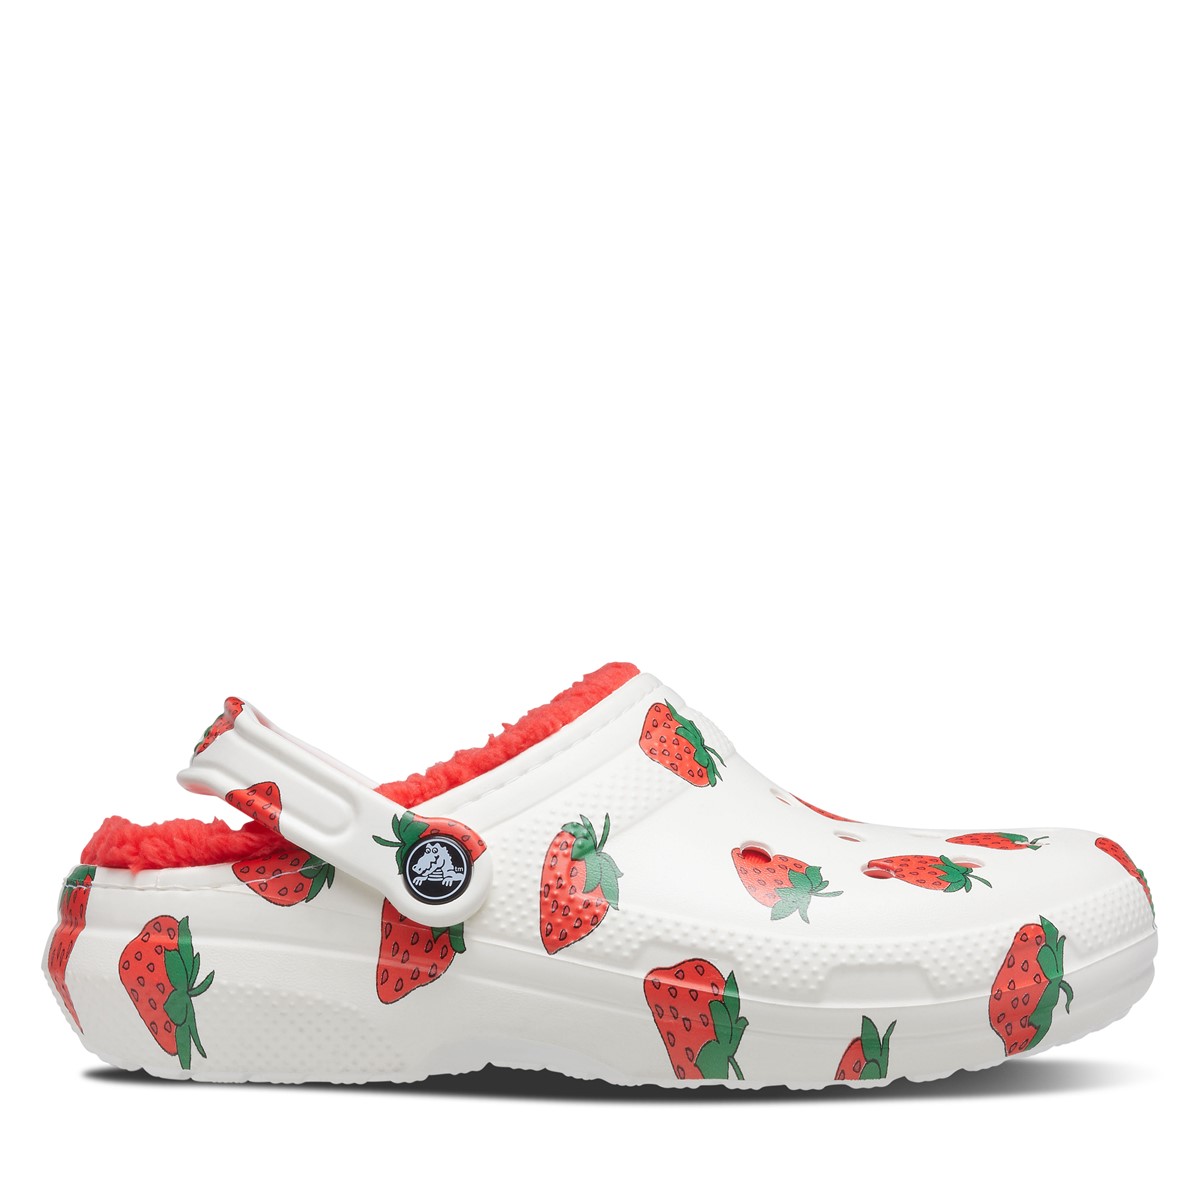 Classic Lined Strawberry Clogs in White/Red